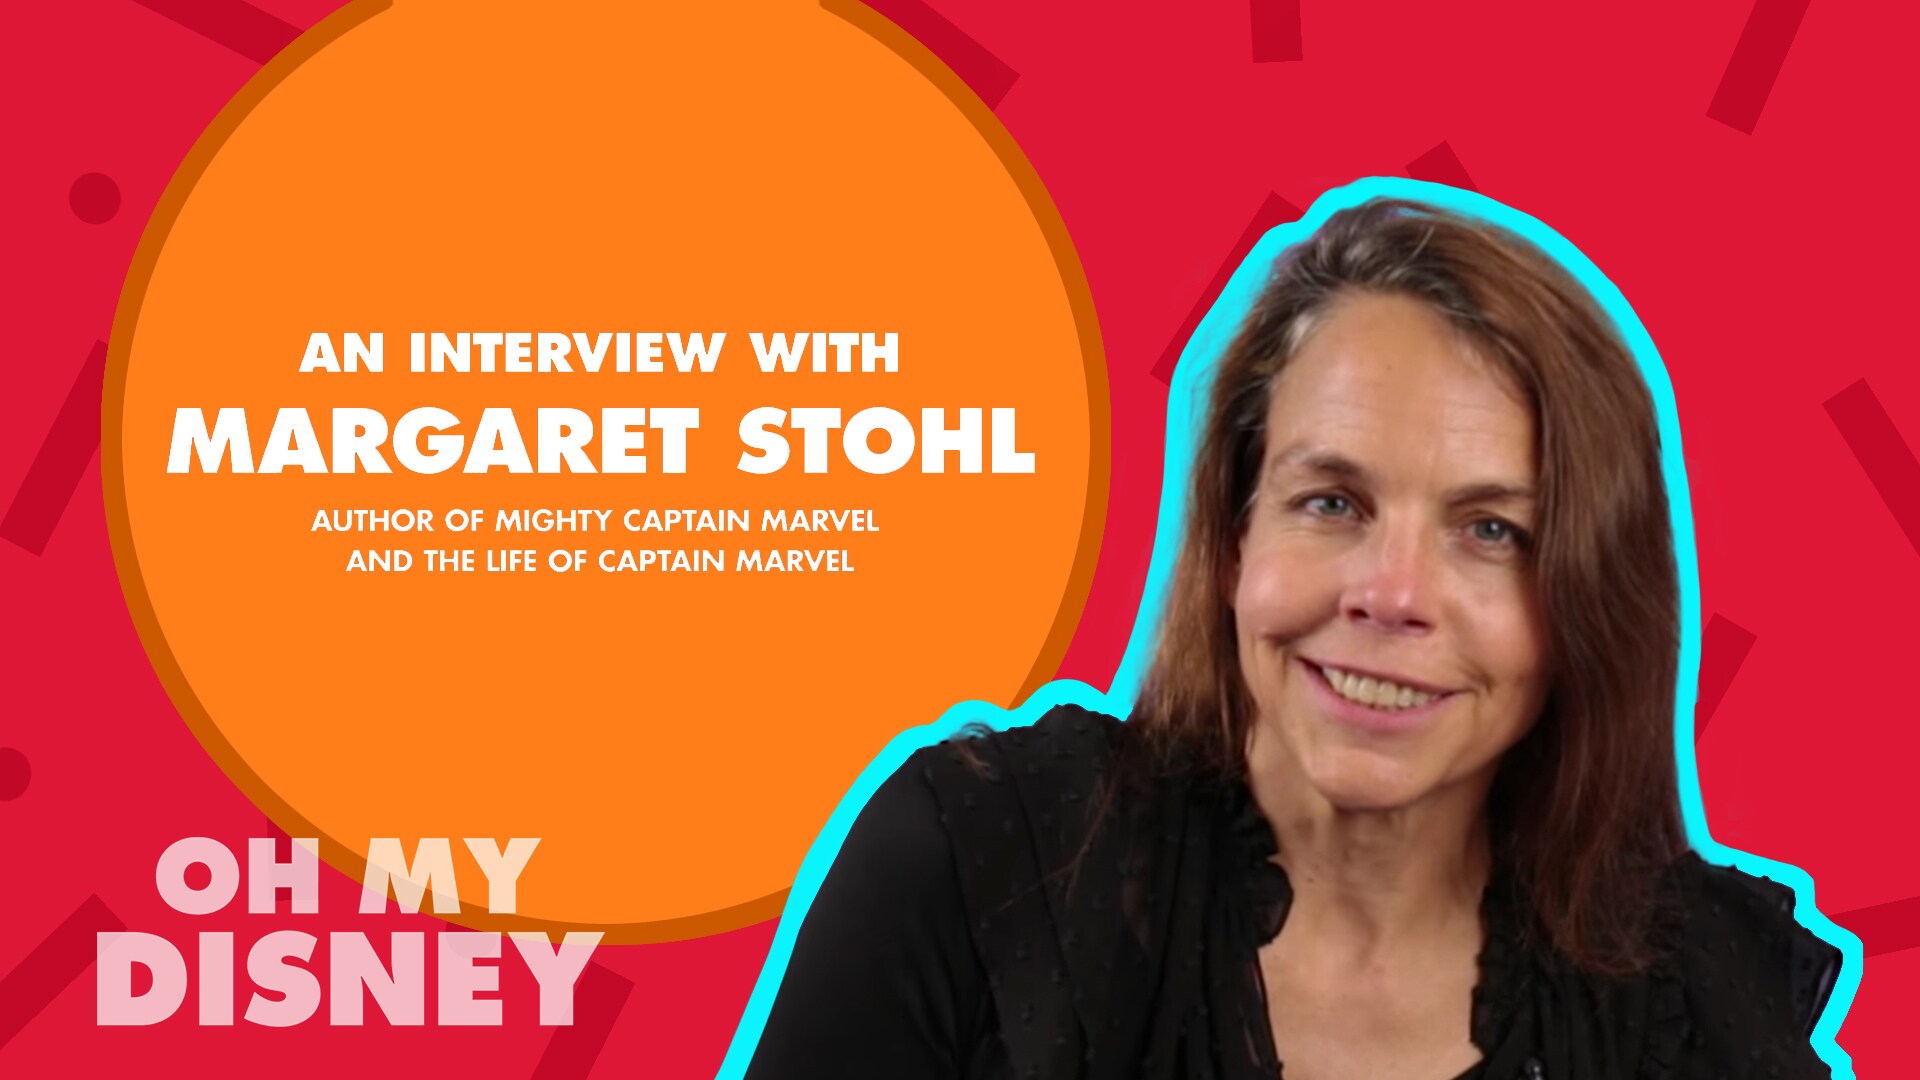 Disney Insider: An Interview with Margaret Stohl